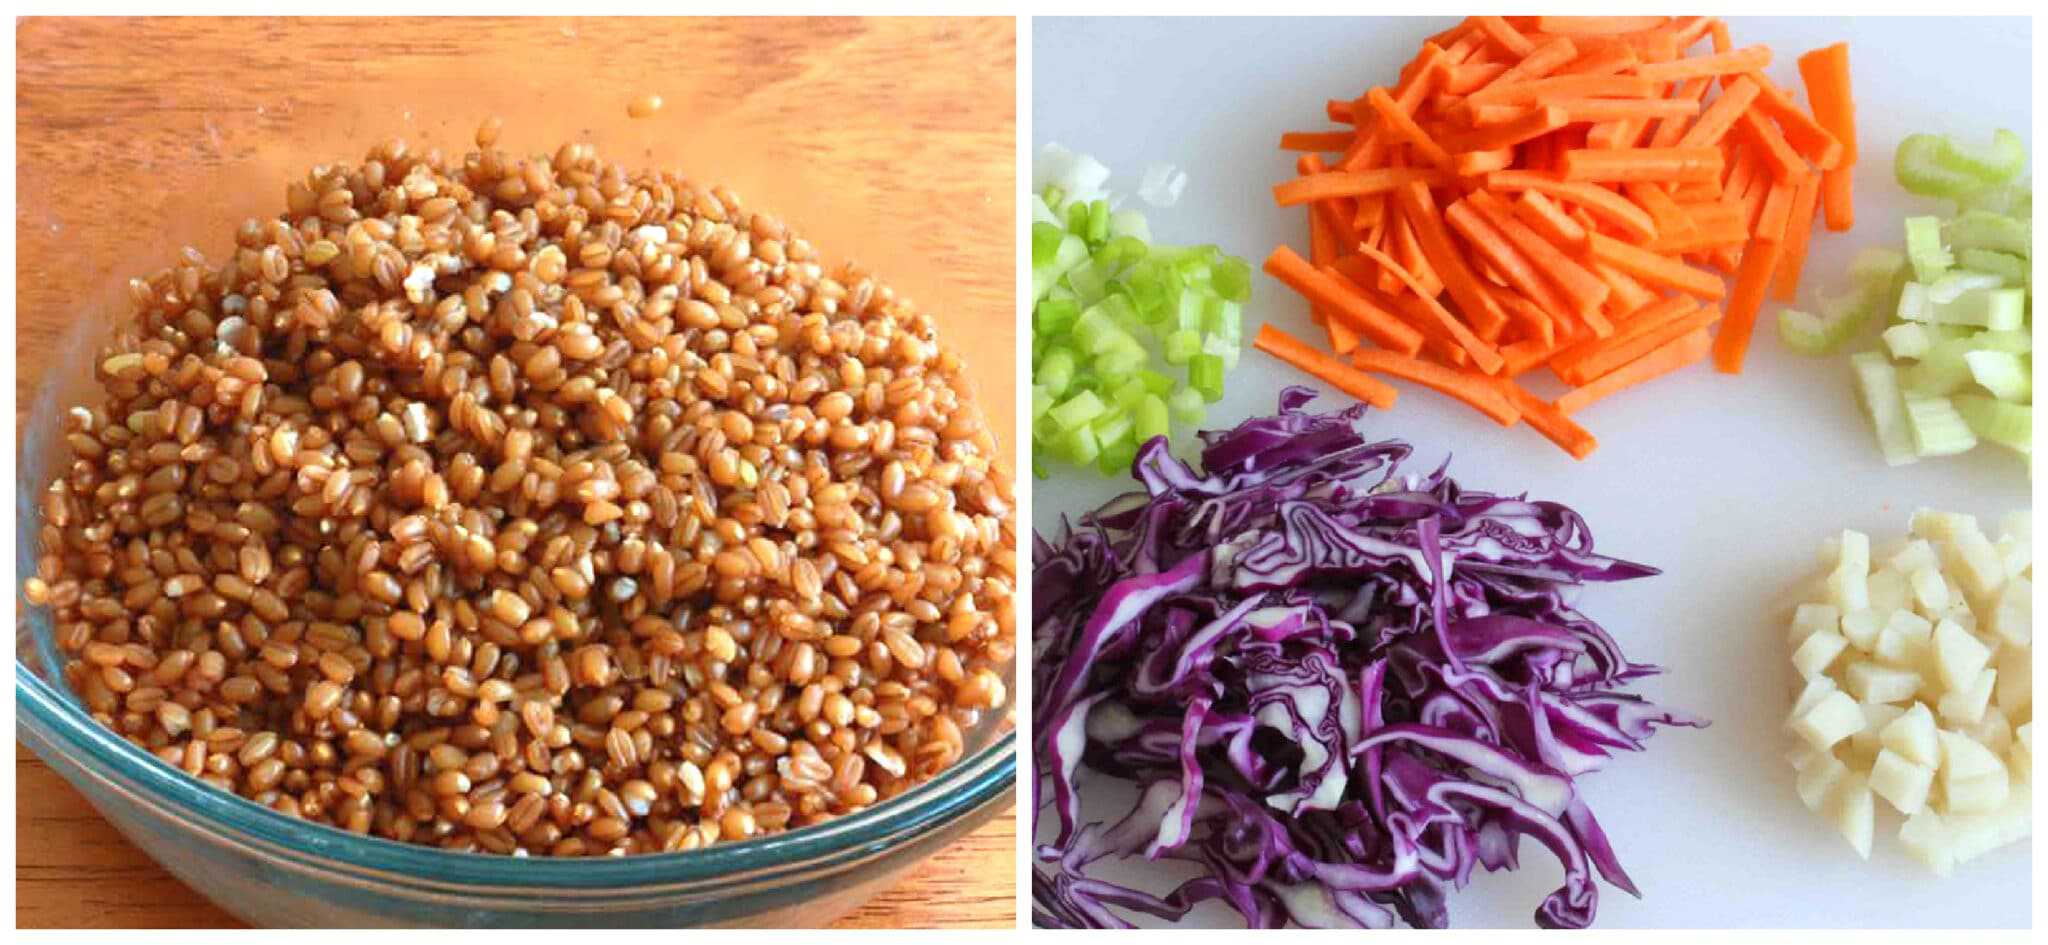 wheat berries and vegetables